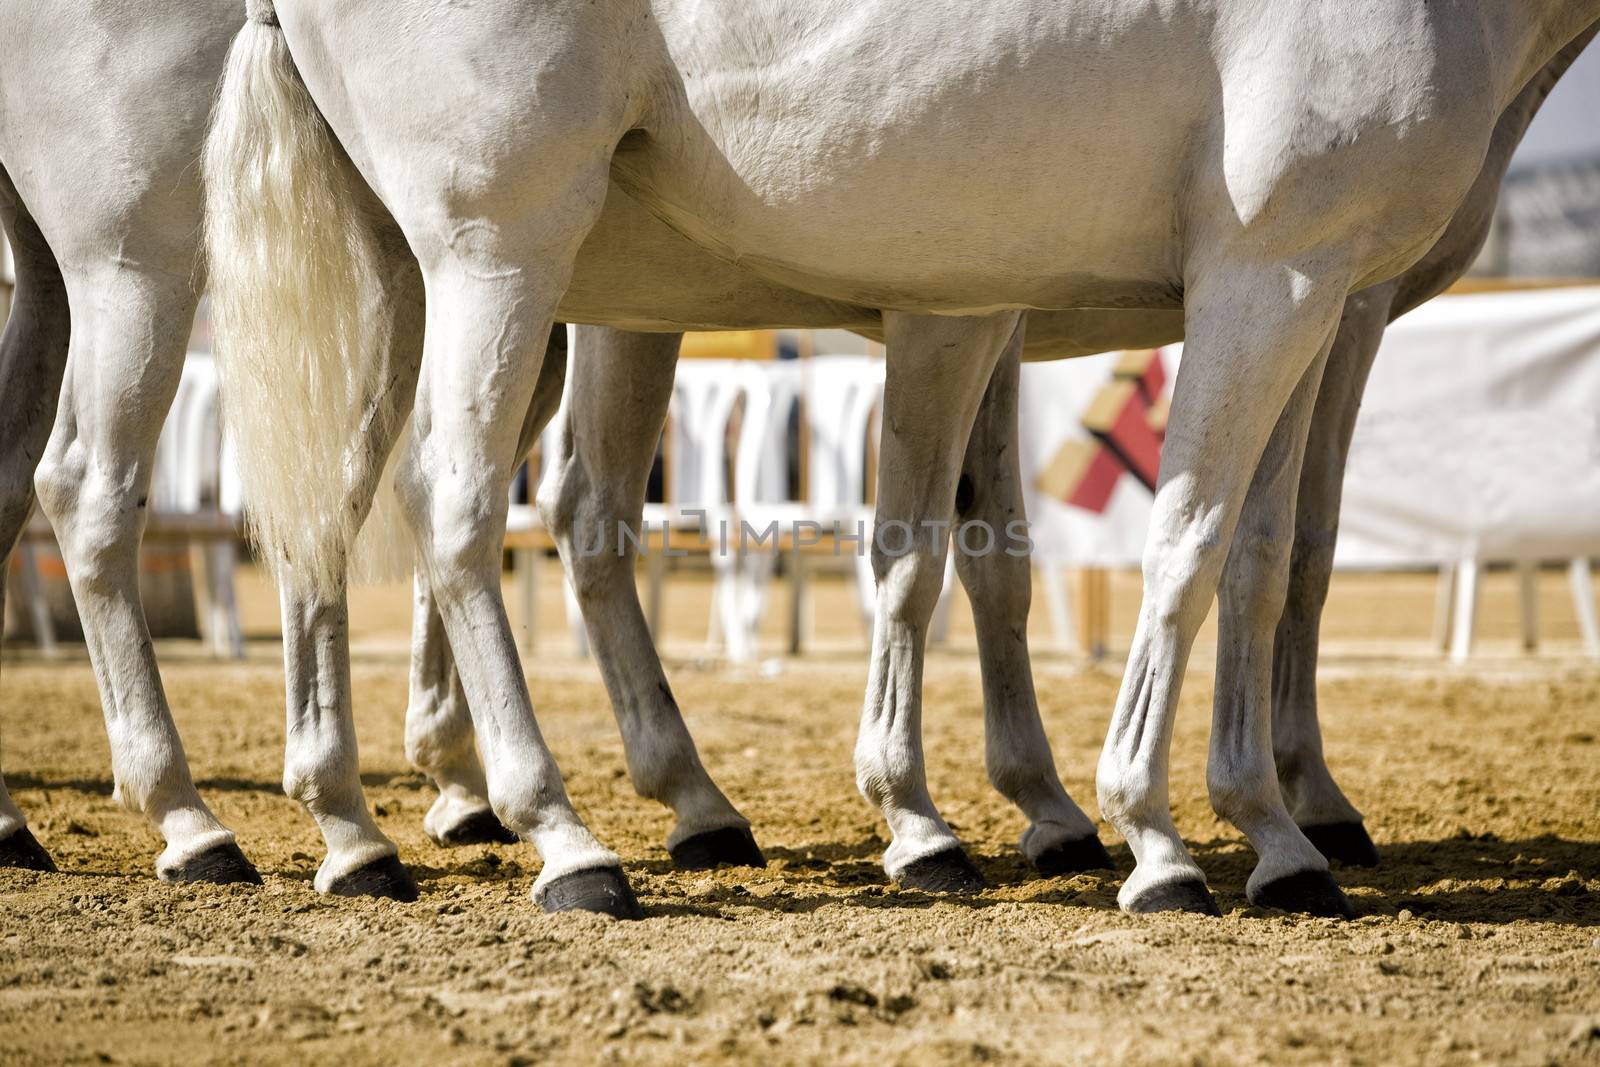 Equestrian test functionality with 3 pure Spanish horses, also called cobras 3 Mares, detail of the legs and hooves, Spain